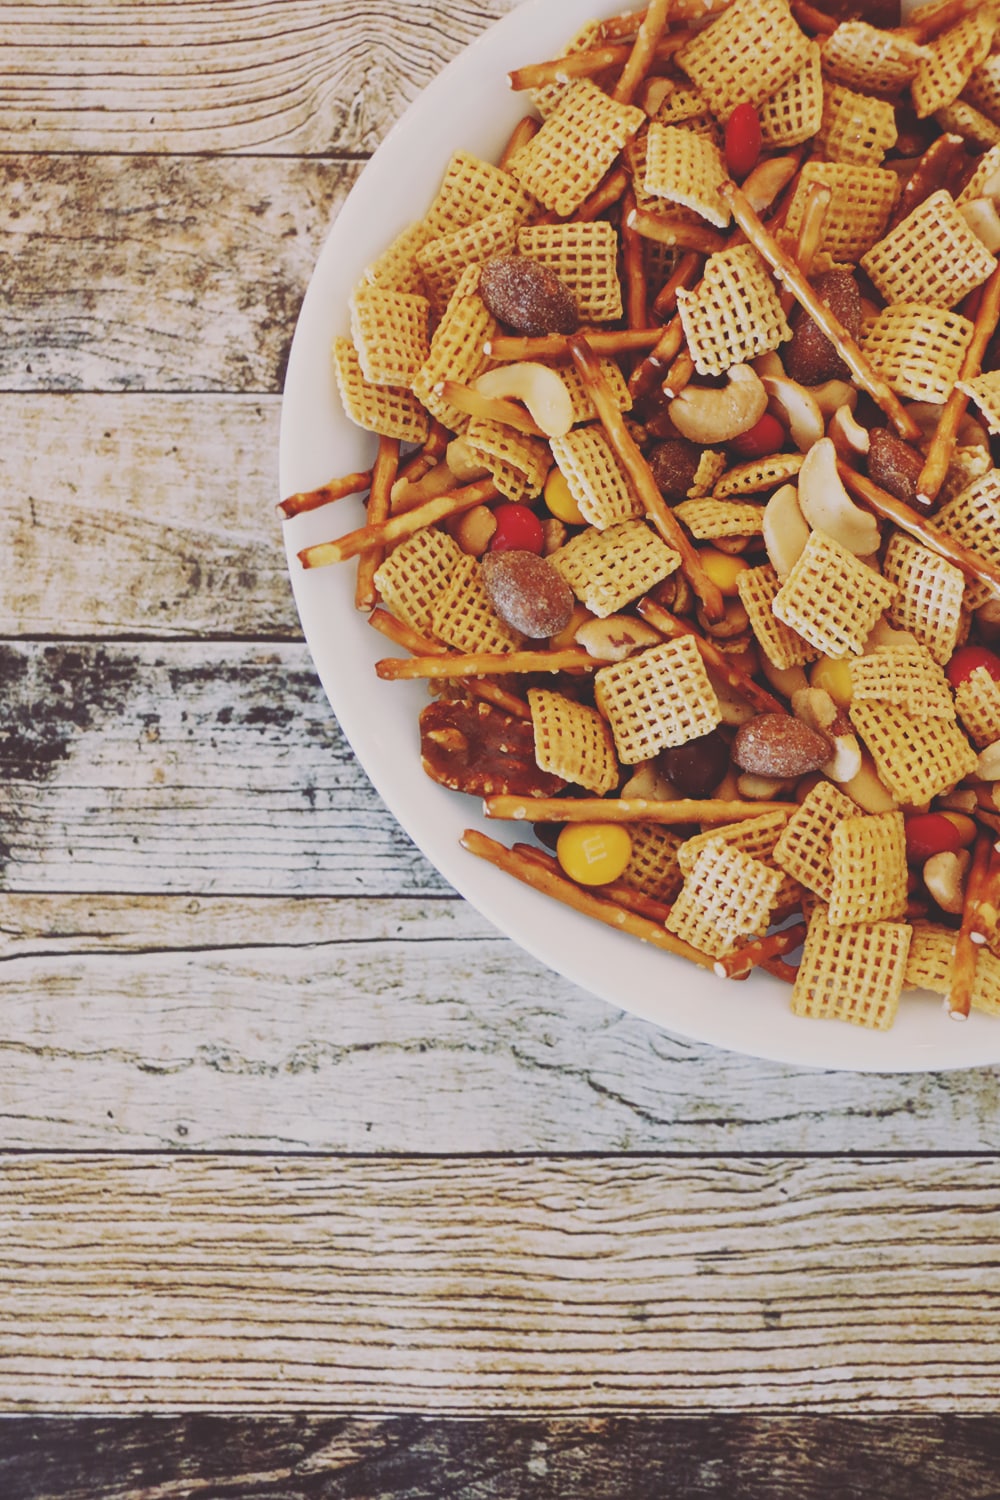 This Autumn Harvest Snack Mix Recipe is a must-have for your holiday get-togethers. With all the Fall flavors, it's sure to be a huge hit with the family!